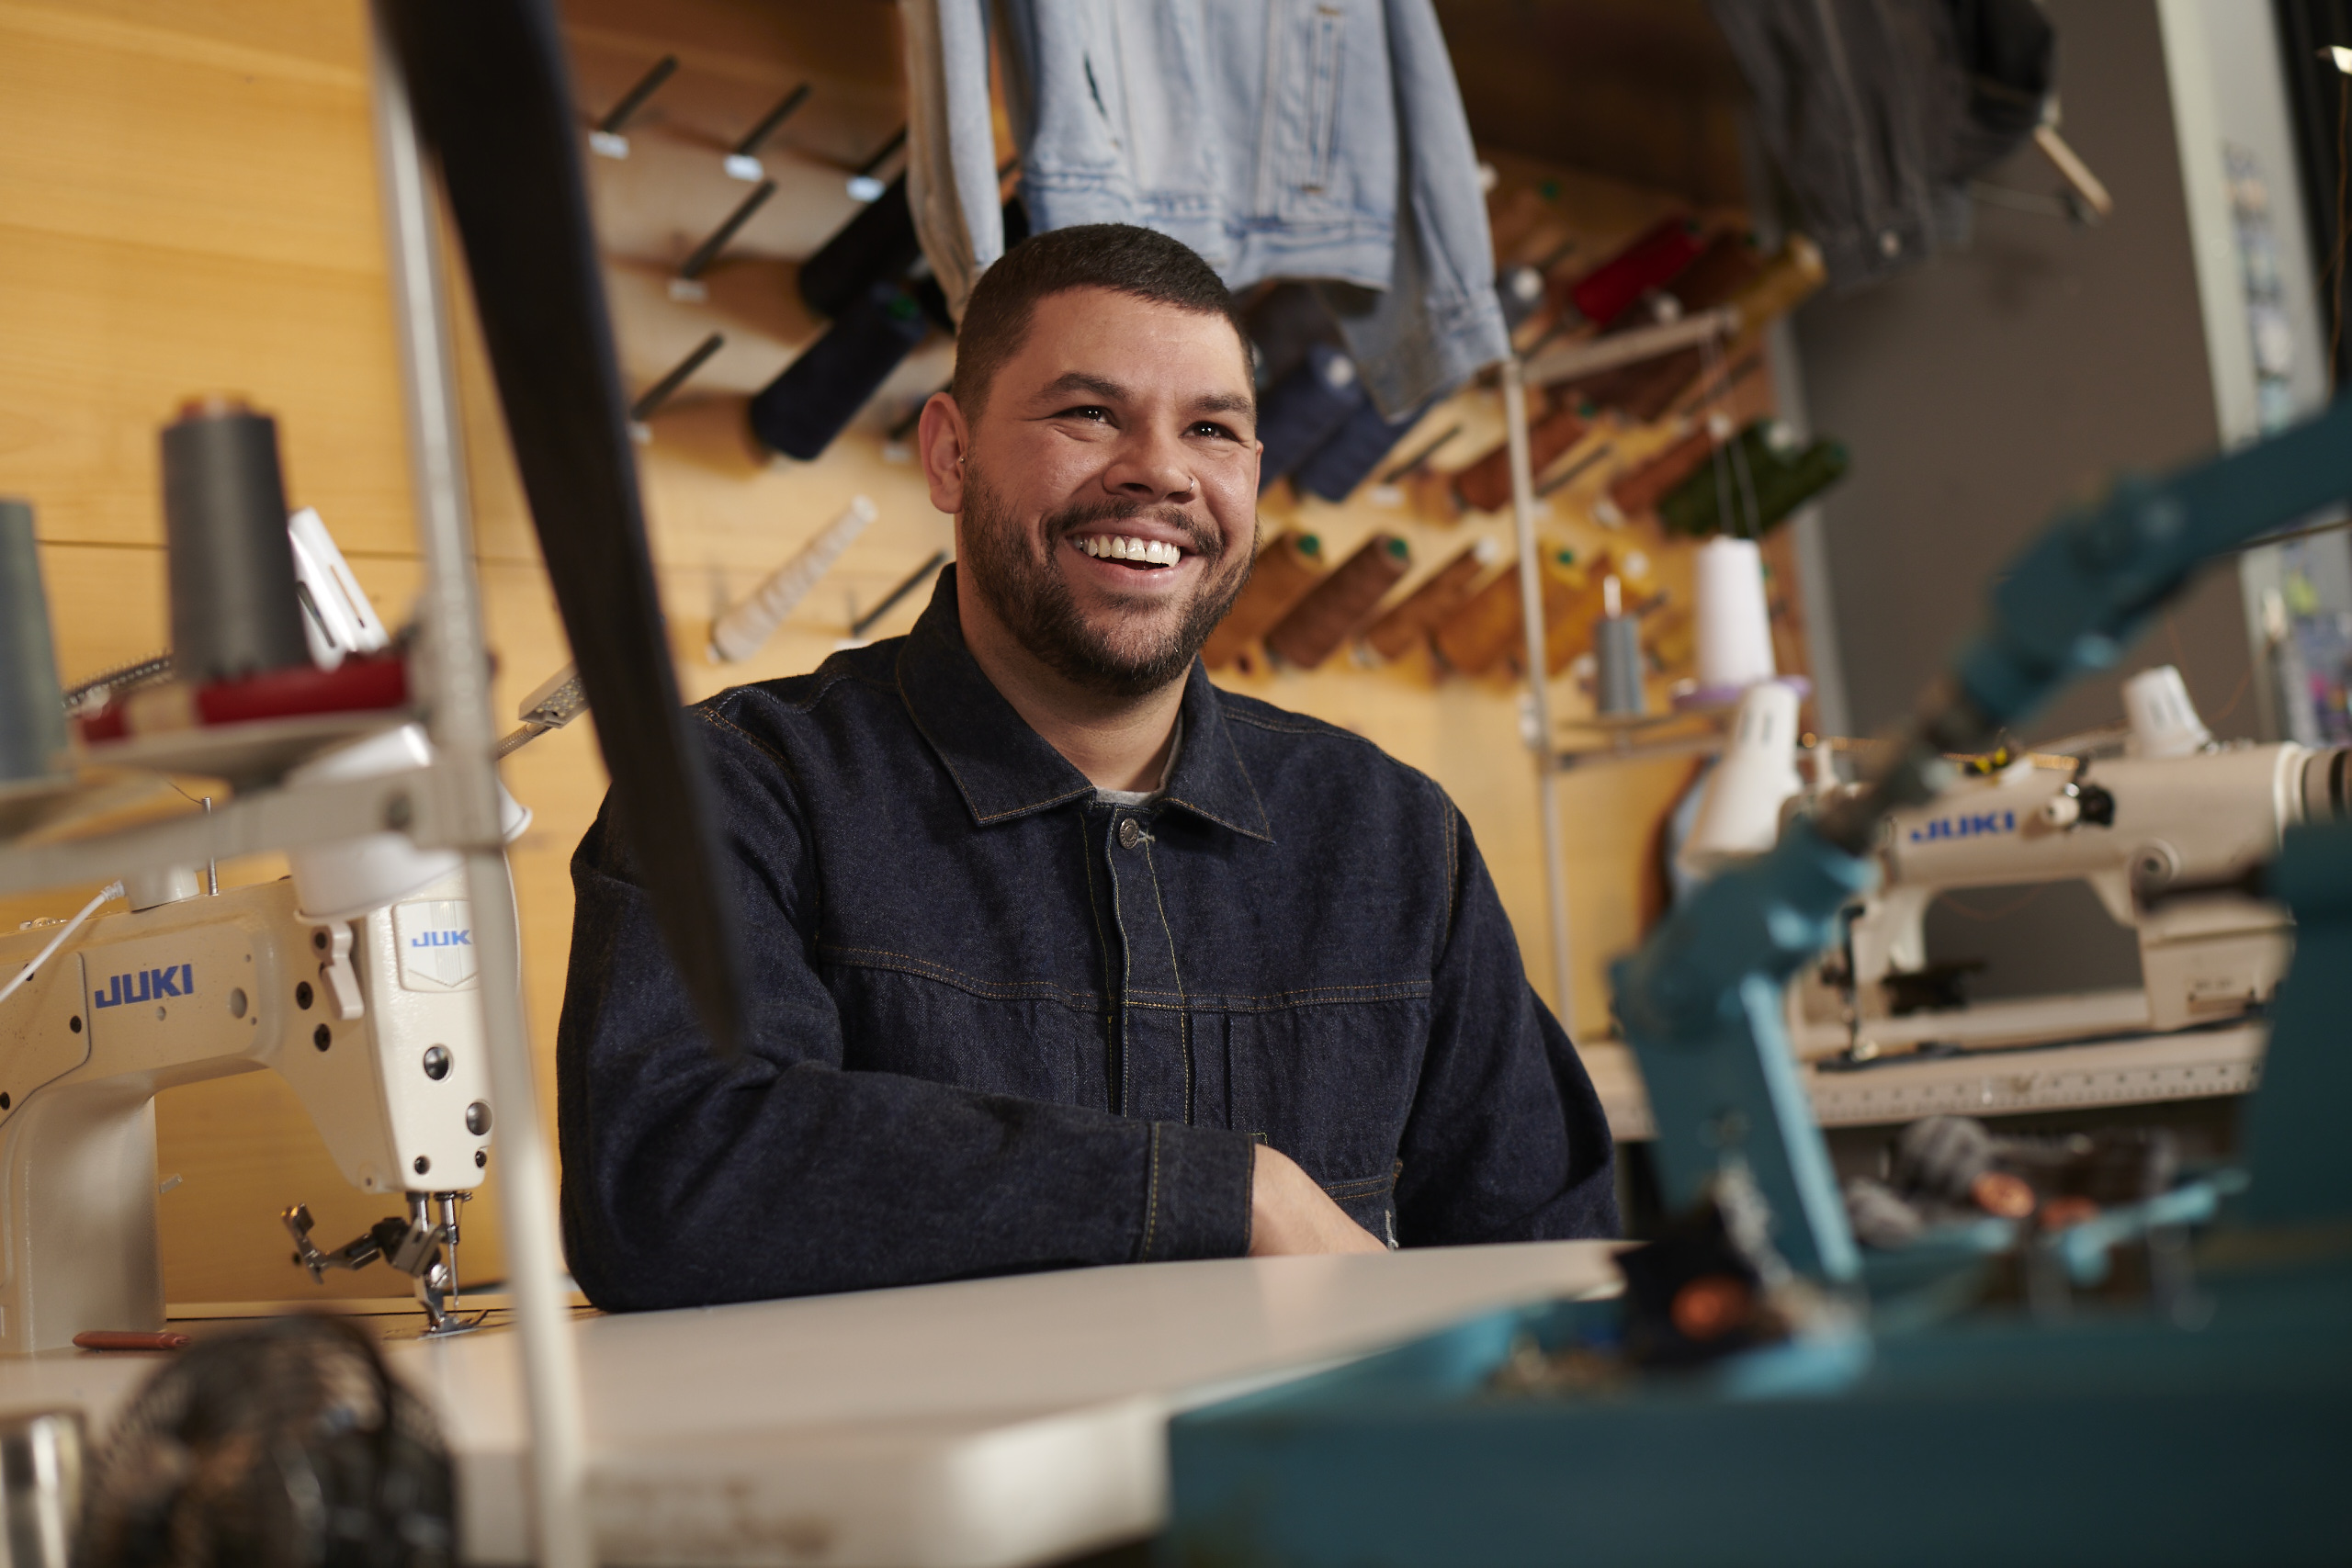 A Levi's® Tailor sits at a Tailorshop workstation and smiles.